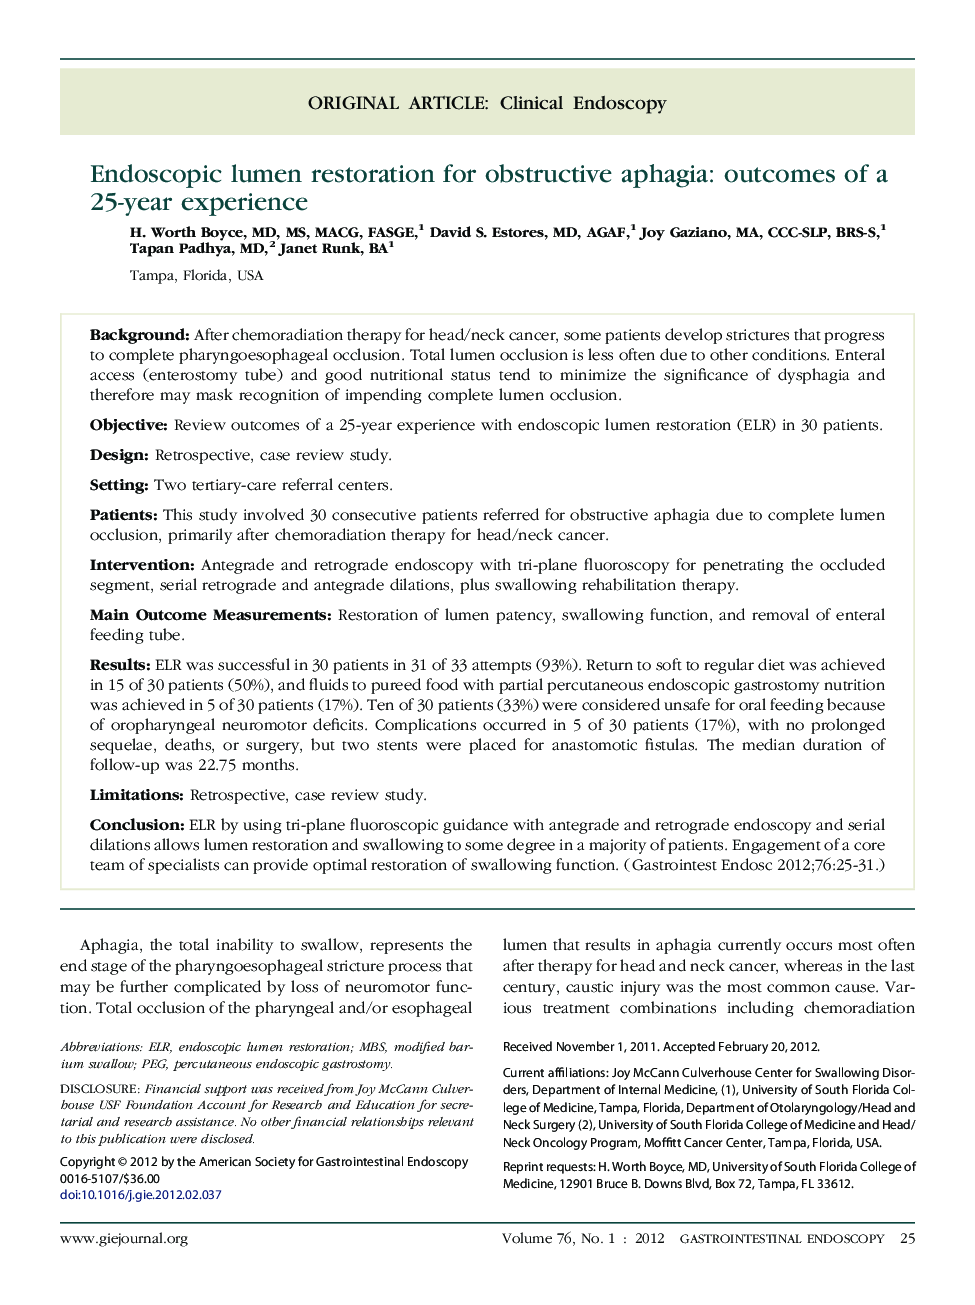 Endoscopic lumen restoration for obstructive aphagia: outcomes of a 25-year experience 